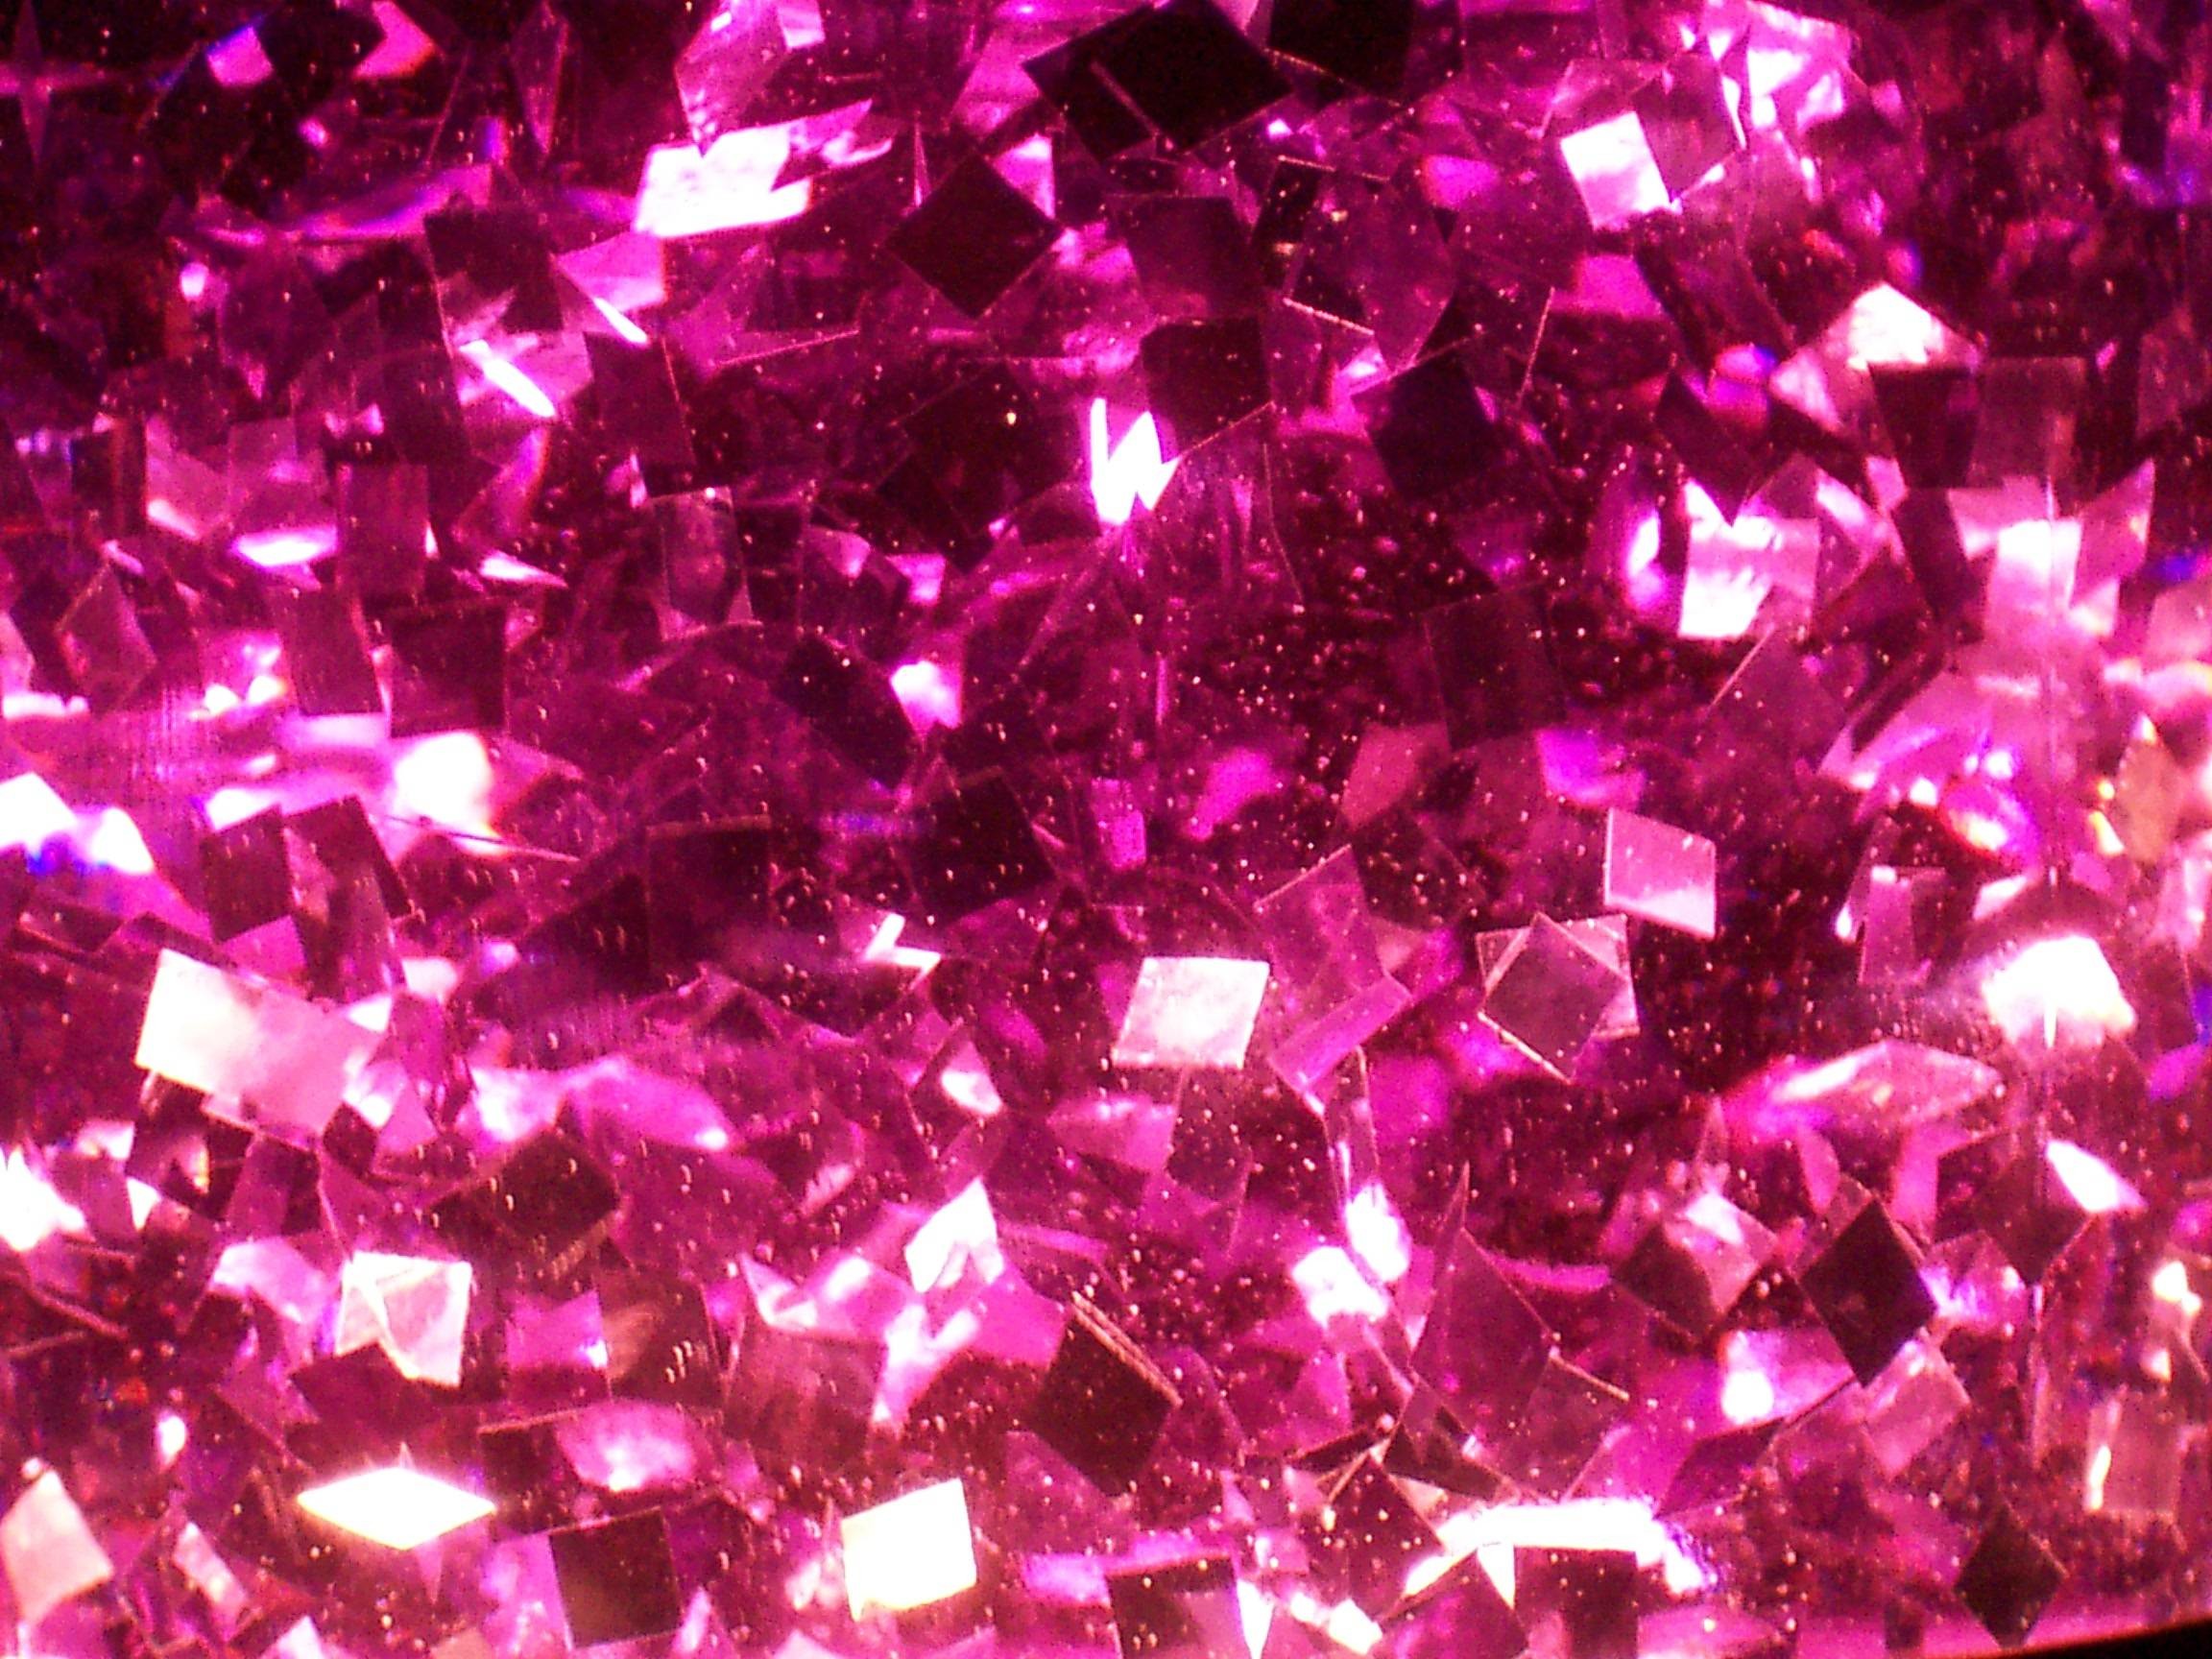 Spirit of the Rose: World's largest vivid purple-pink diamond up for auction